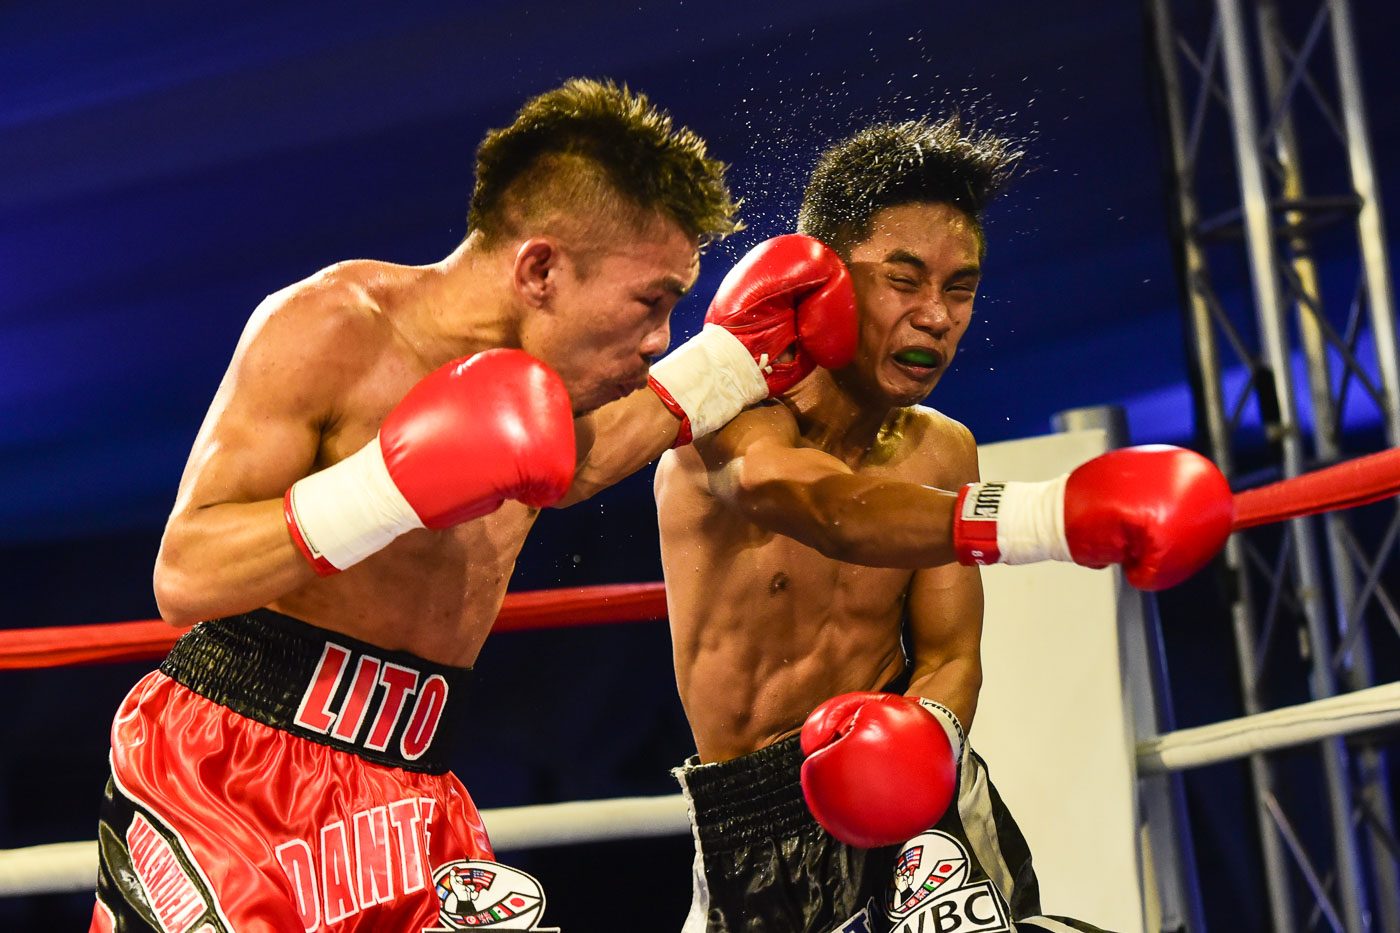 Lito Dante (L) moved his record to 13-7-4 (7 KOs) and won the vacant WBC International minimumweight title with a unanimous decision win over previously unbeaten fighter Jay Loto.  